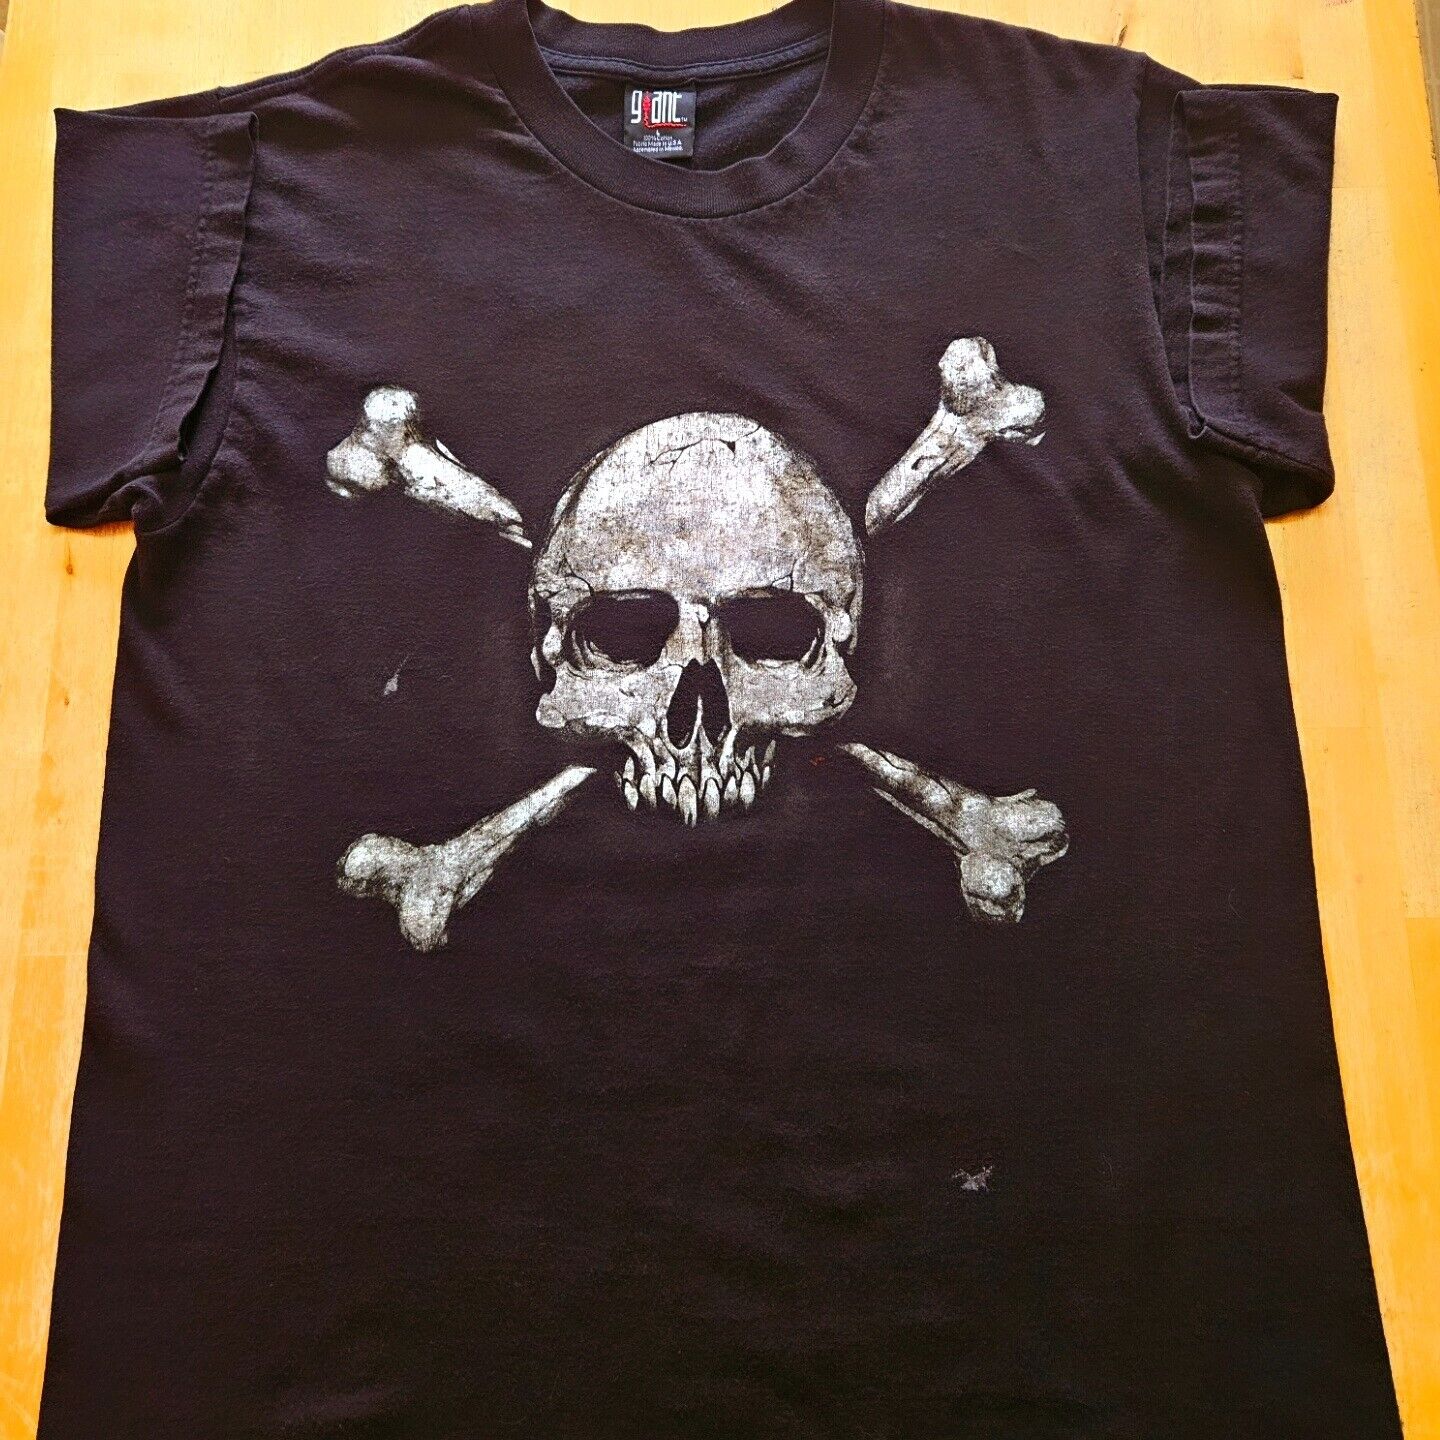 Vintage 1999 Cypress Hill Skull and Bones T-shirt Rare Giant Tag